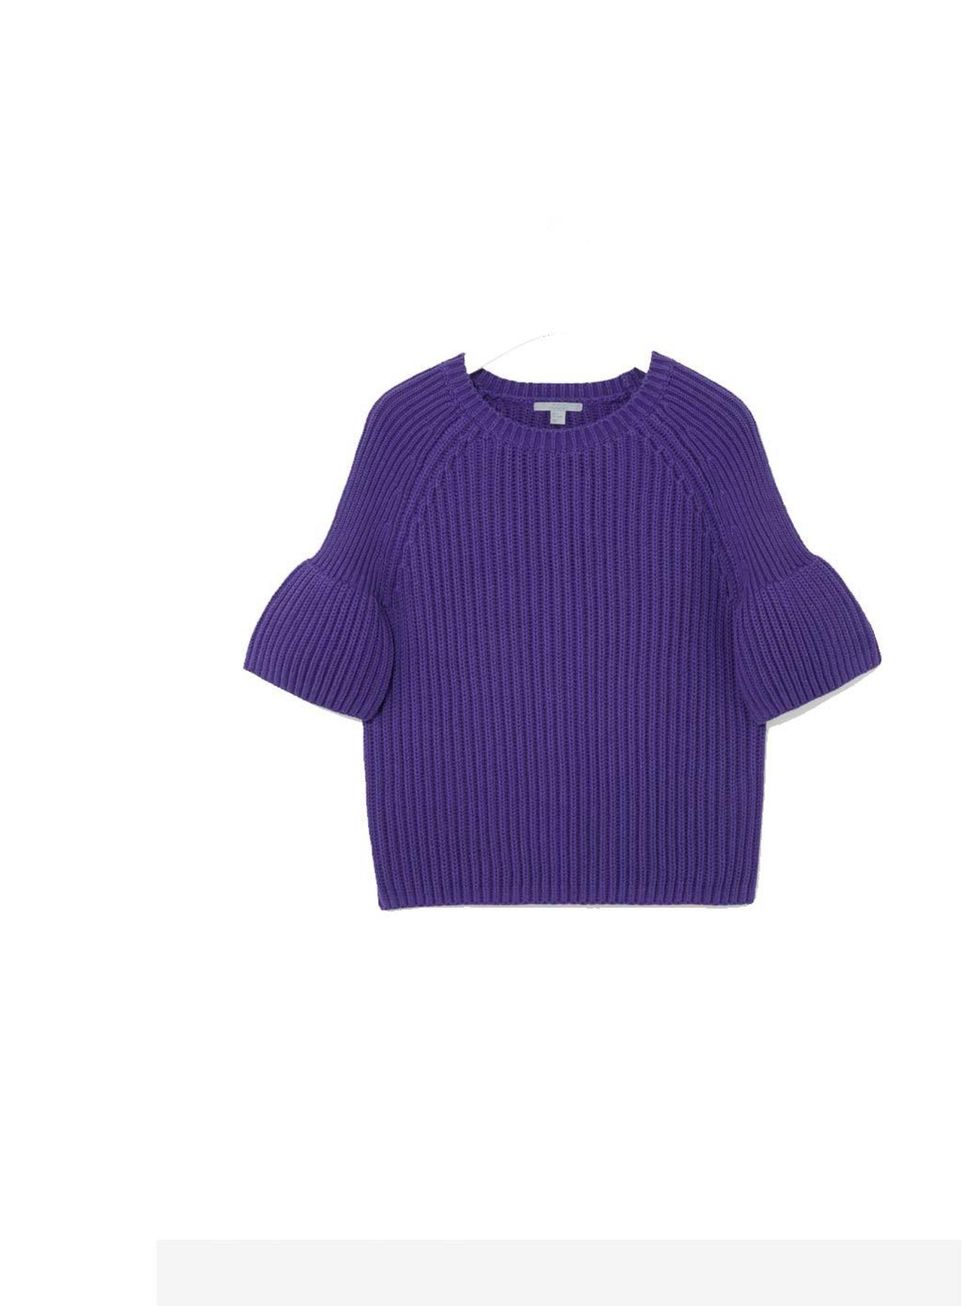 <p>Zingy purple and flirty sleeves- a knit with a twist. Cos, £55, <a href="http://www.cosstores.com/gb/Shop/Women/Knitwear/Rounded_cuff_jumper/46889-12464866.1">cosstores.com</a></p>